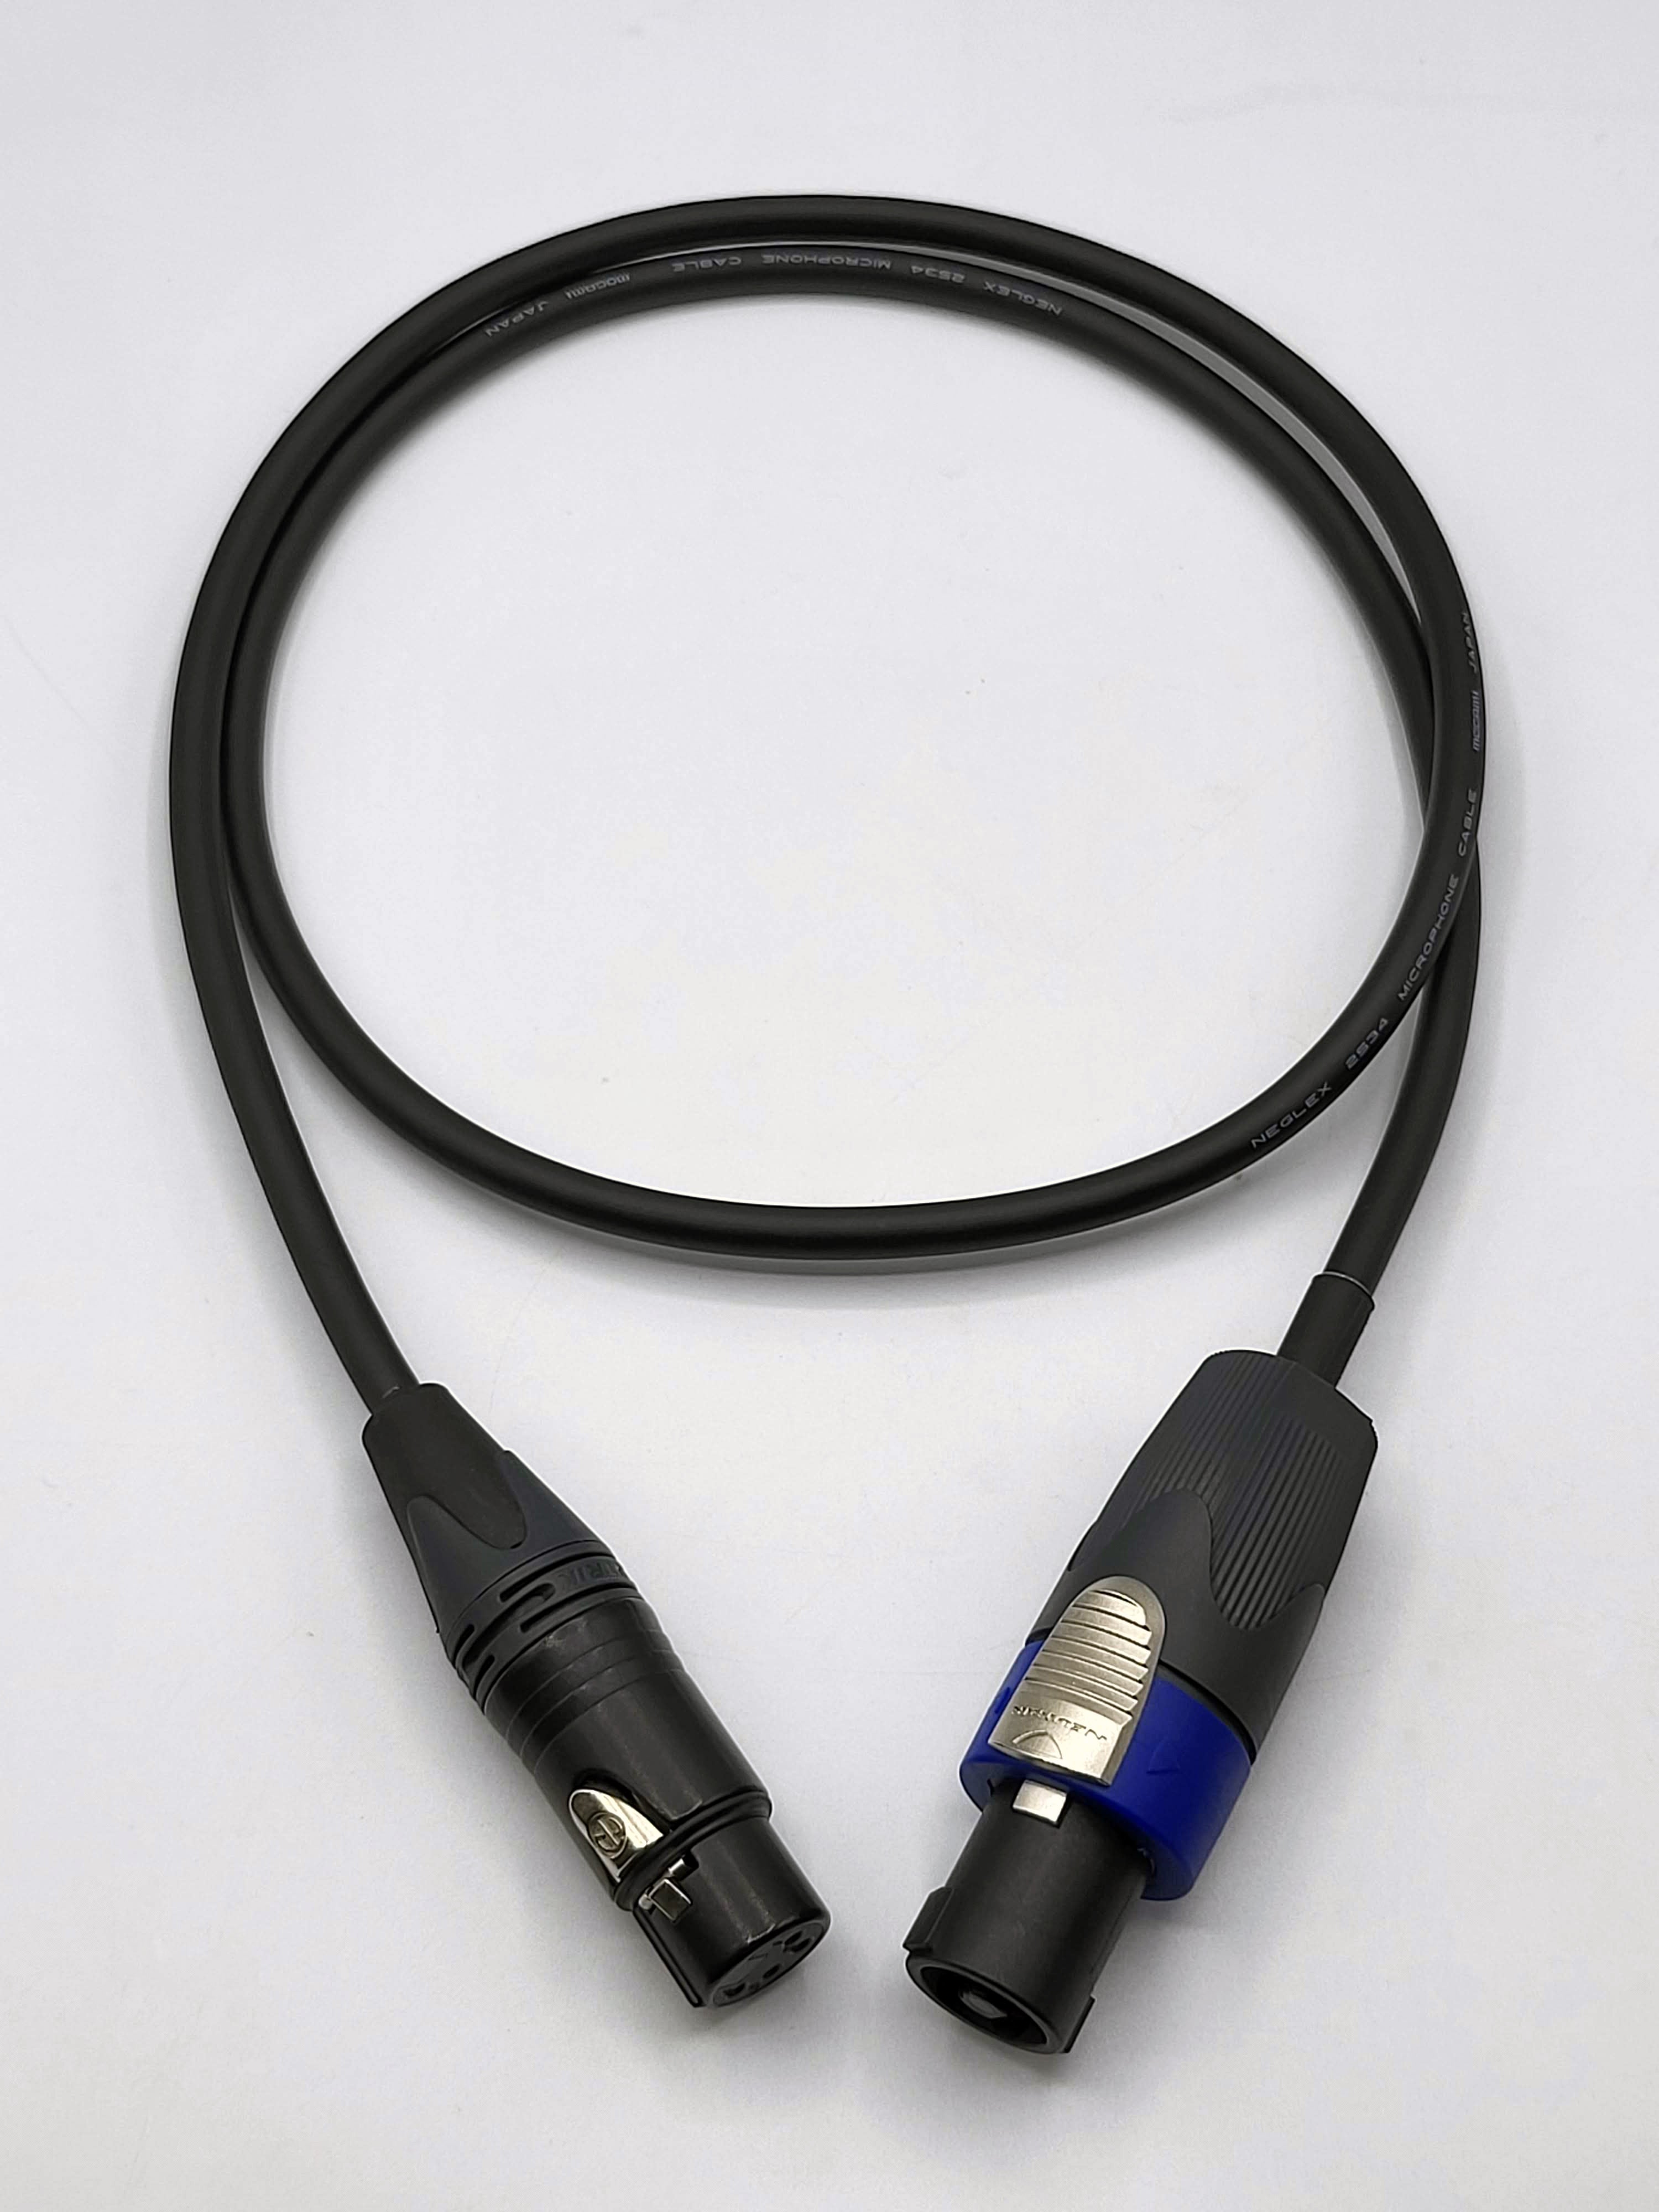 Headphone Adaptor Cable - Benchmark AHB2 -  NL4 to Female 4 Pin XLR - Mogami Cable